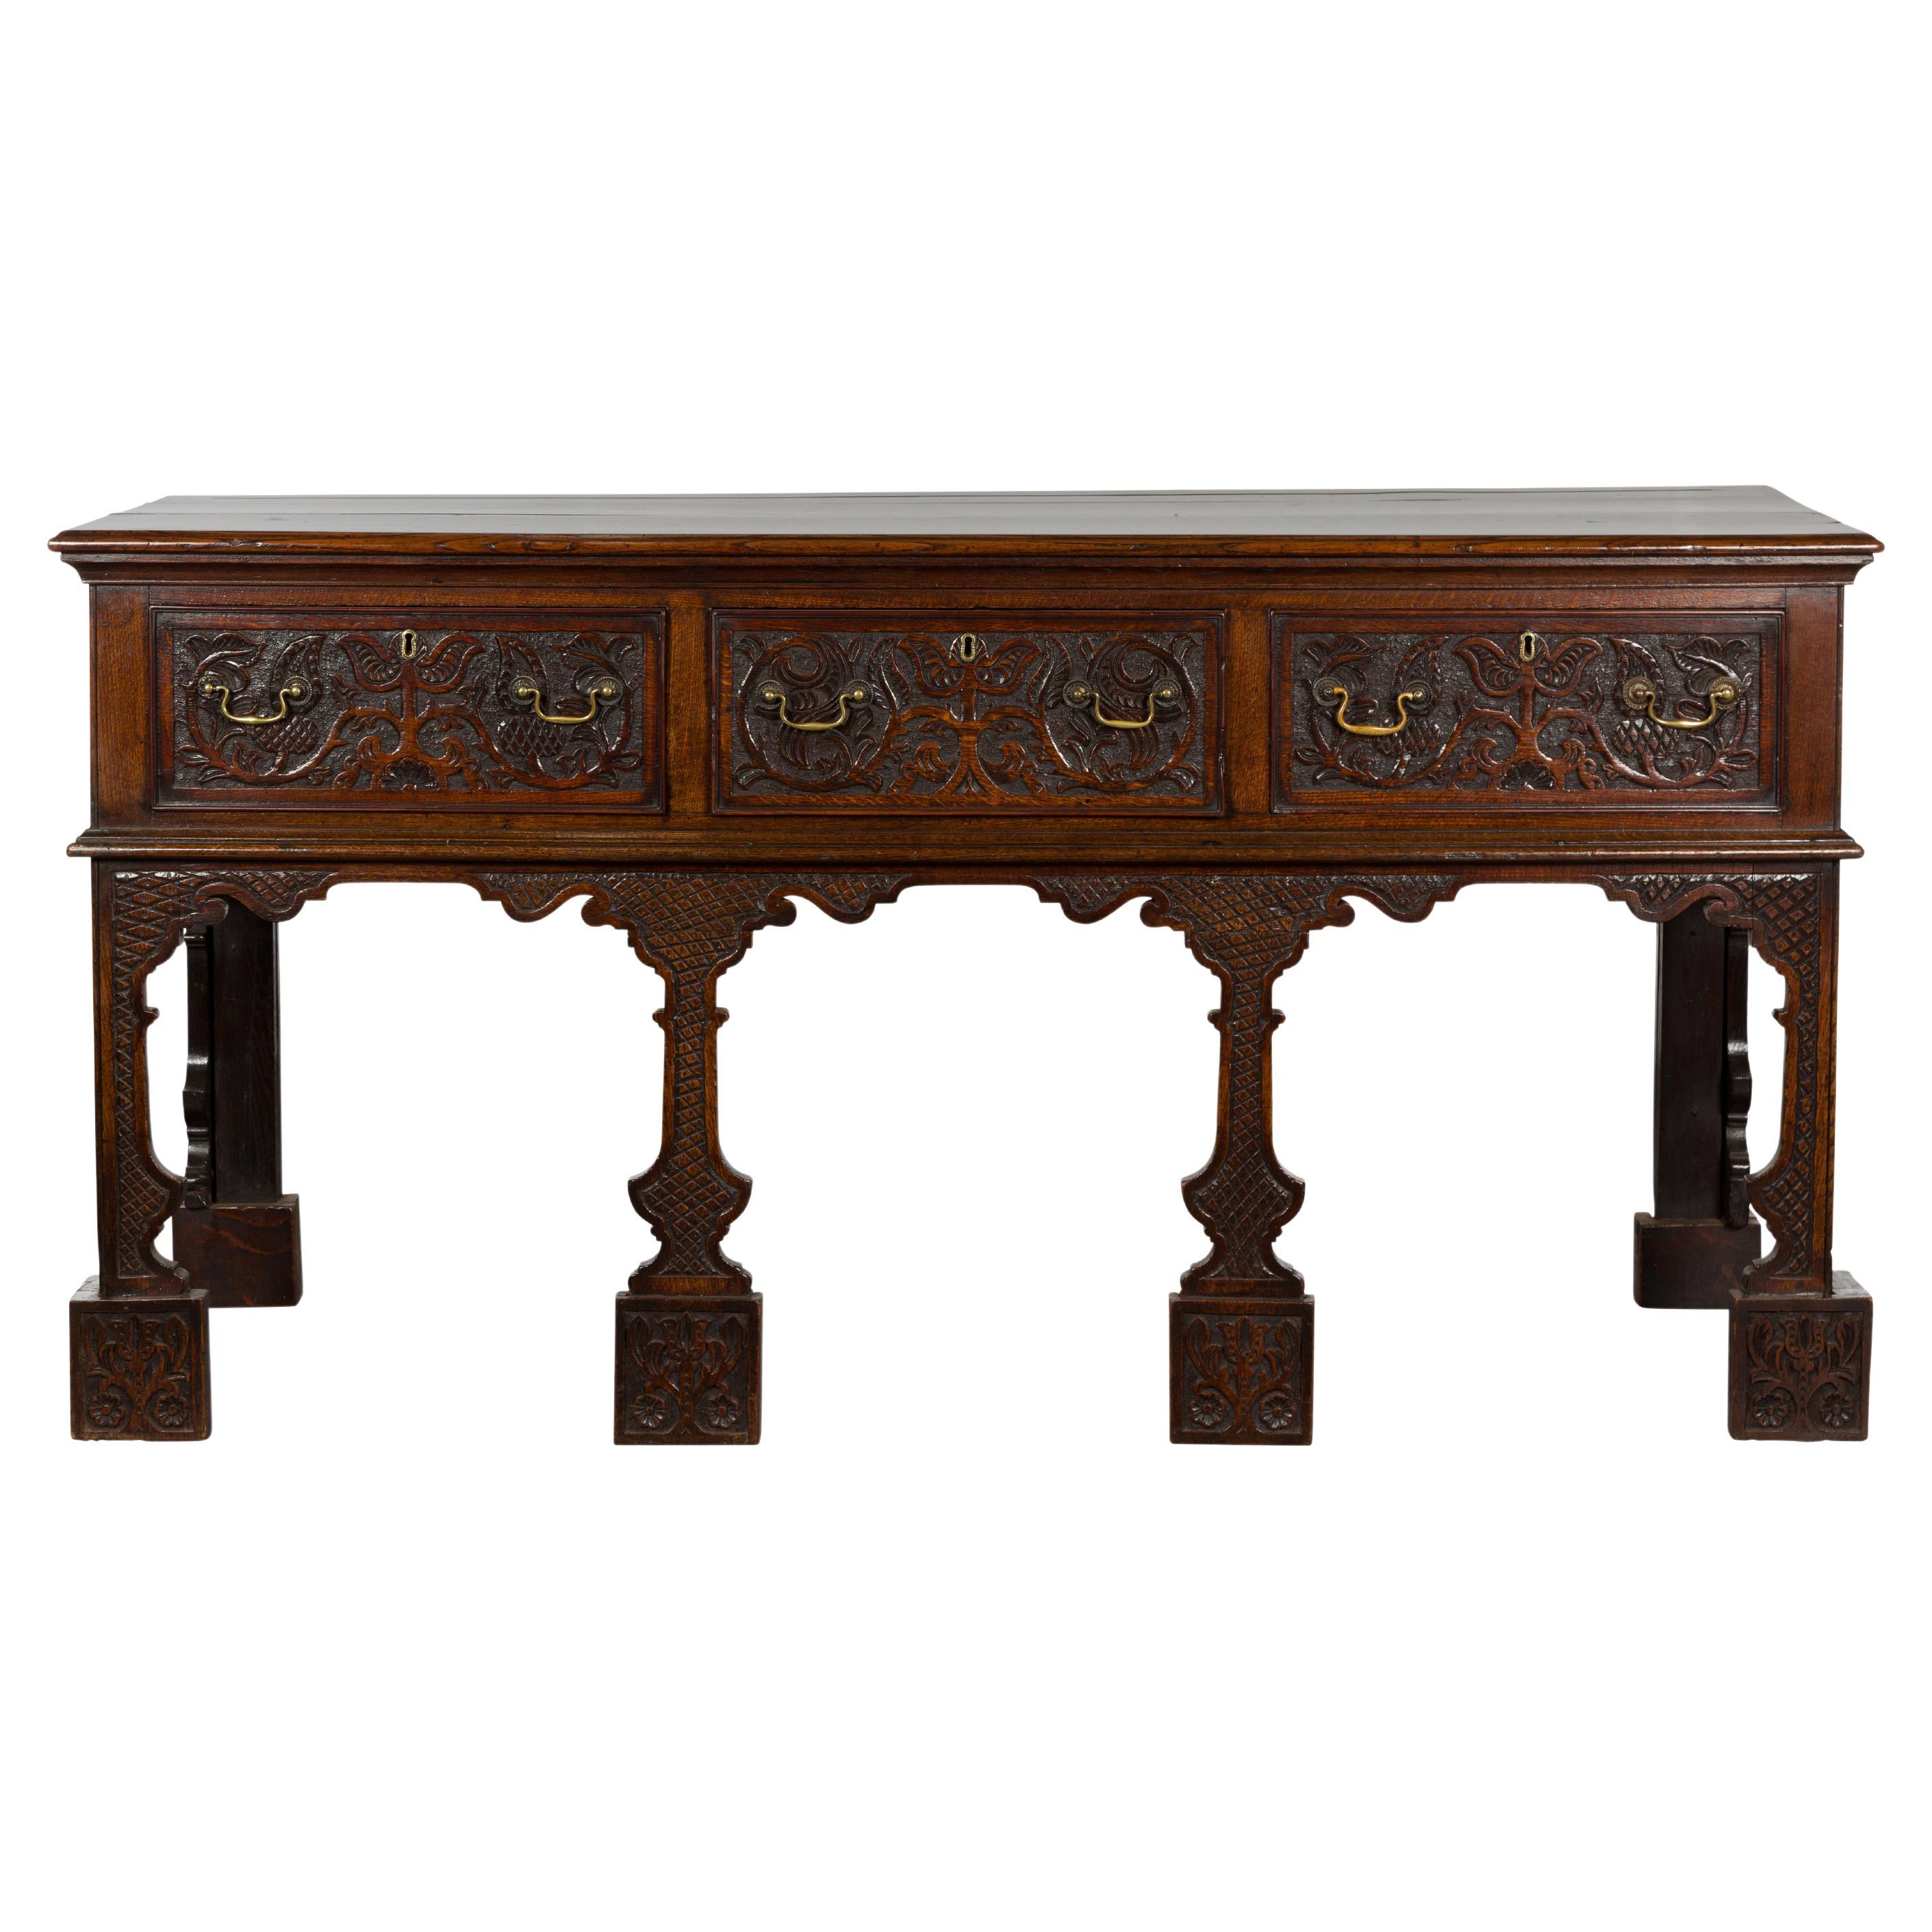 English 19th Century Oak Sideboard with Three Low-Relief Carved Drawers For Sale